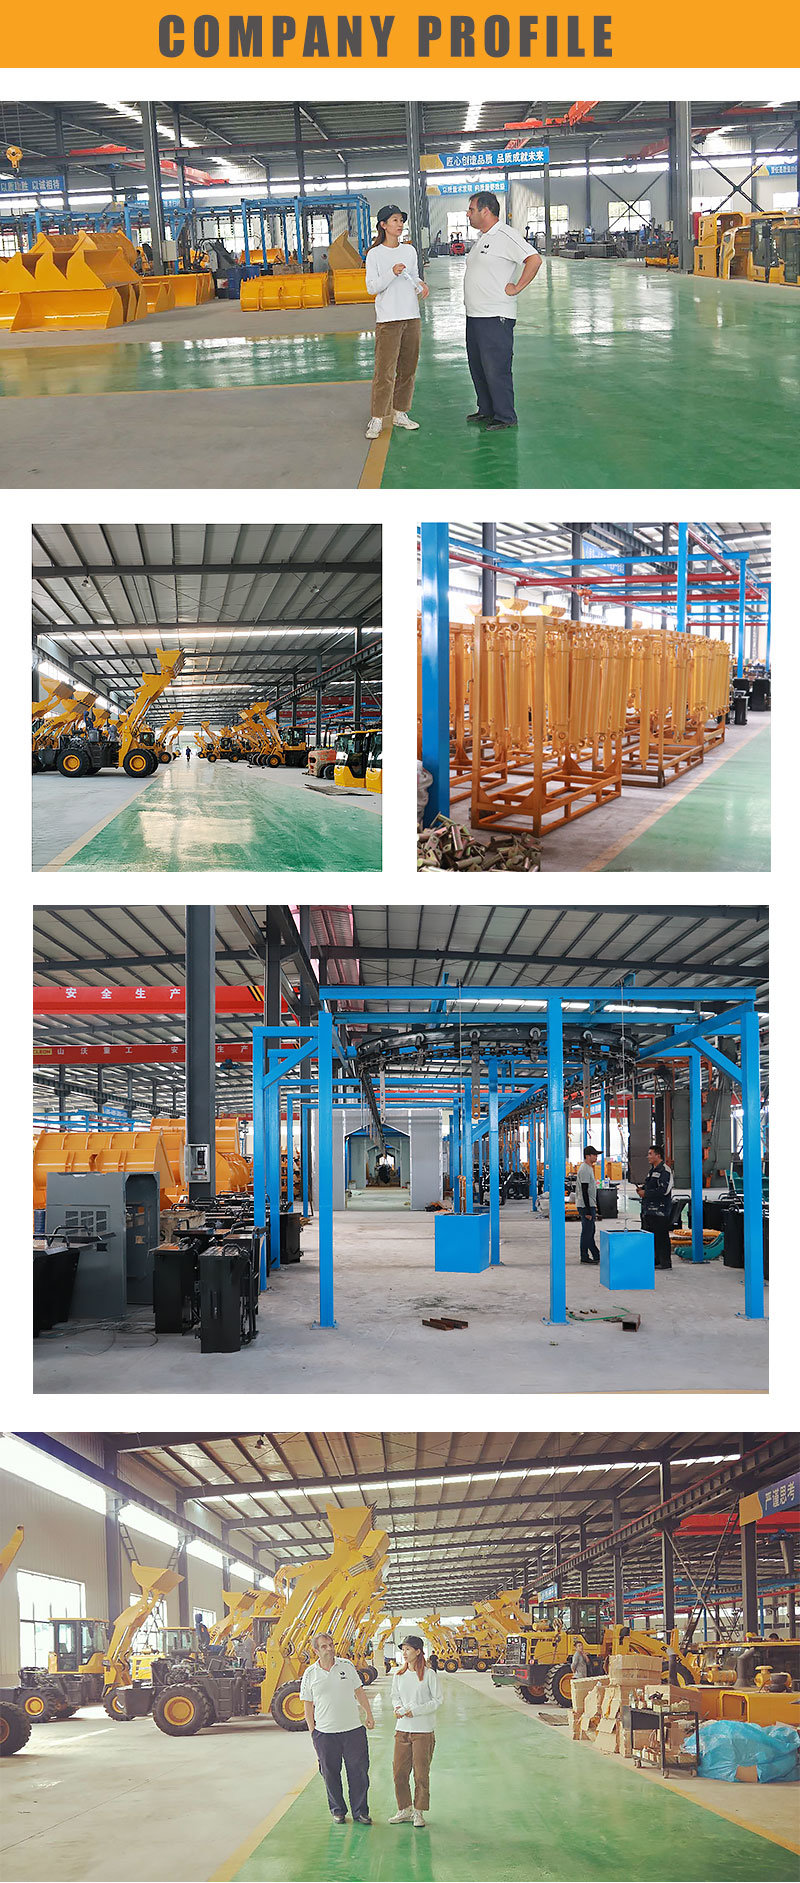 CE ISO Certification OEM China Manufacture 4WD AL9800 Grab Sugar Cane Sugarcane Loader with SGS